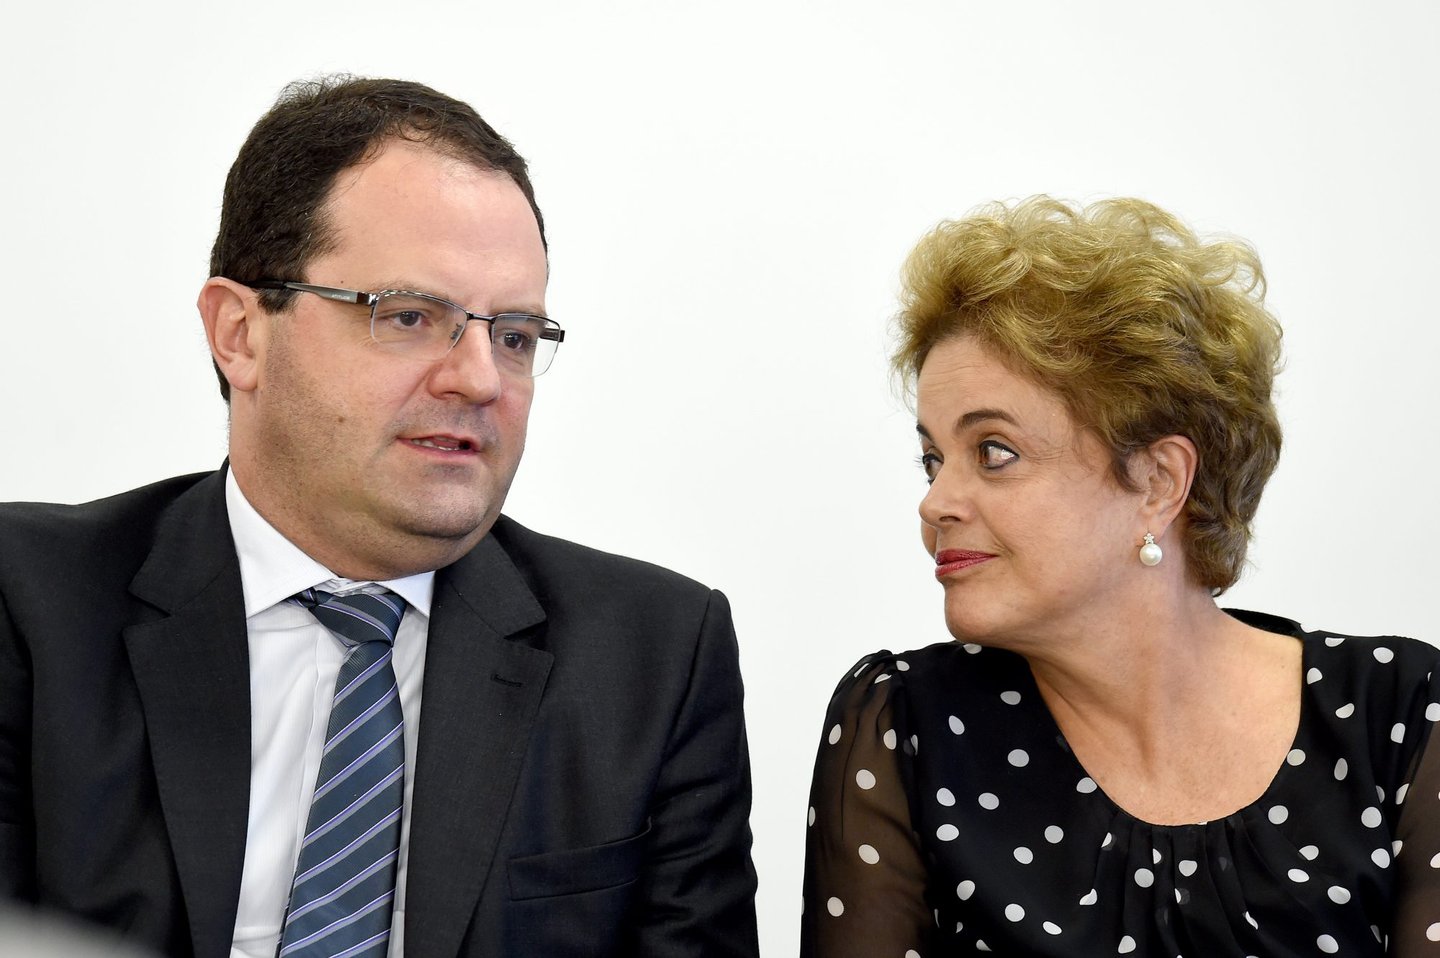 Brazilian President Dilma Rousseff (R) talks to her Finance Minister Nelson Barbosa during a ceremony to renovate the leasing contract regarding the use of the Paranagua Container Terminal, at Planalto Palace in Brasilia, on April 13, 2016. Brazil's President Dilma Rousseff vowed Wednesday she will "fight to the last minute" against efforts to impeach her, despite key allies deserting her as she clings to office. Lawmakers will hold a crucial vote on impeachment proceedings against Rousseff in congress on Sunday. / AFP / EVARISTO SA (Photo credit should read EVARISTO SA/AFP/Getty Images)